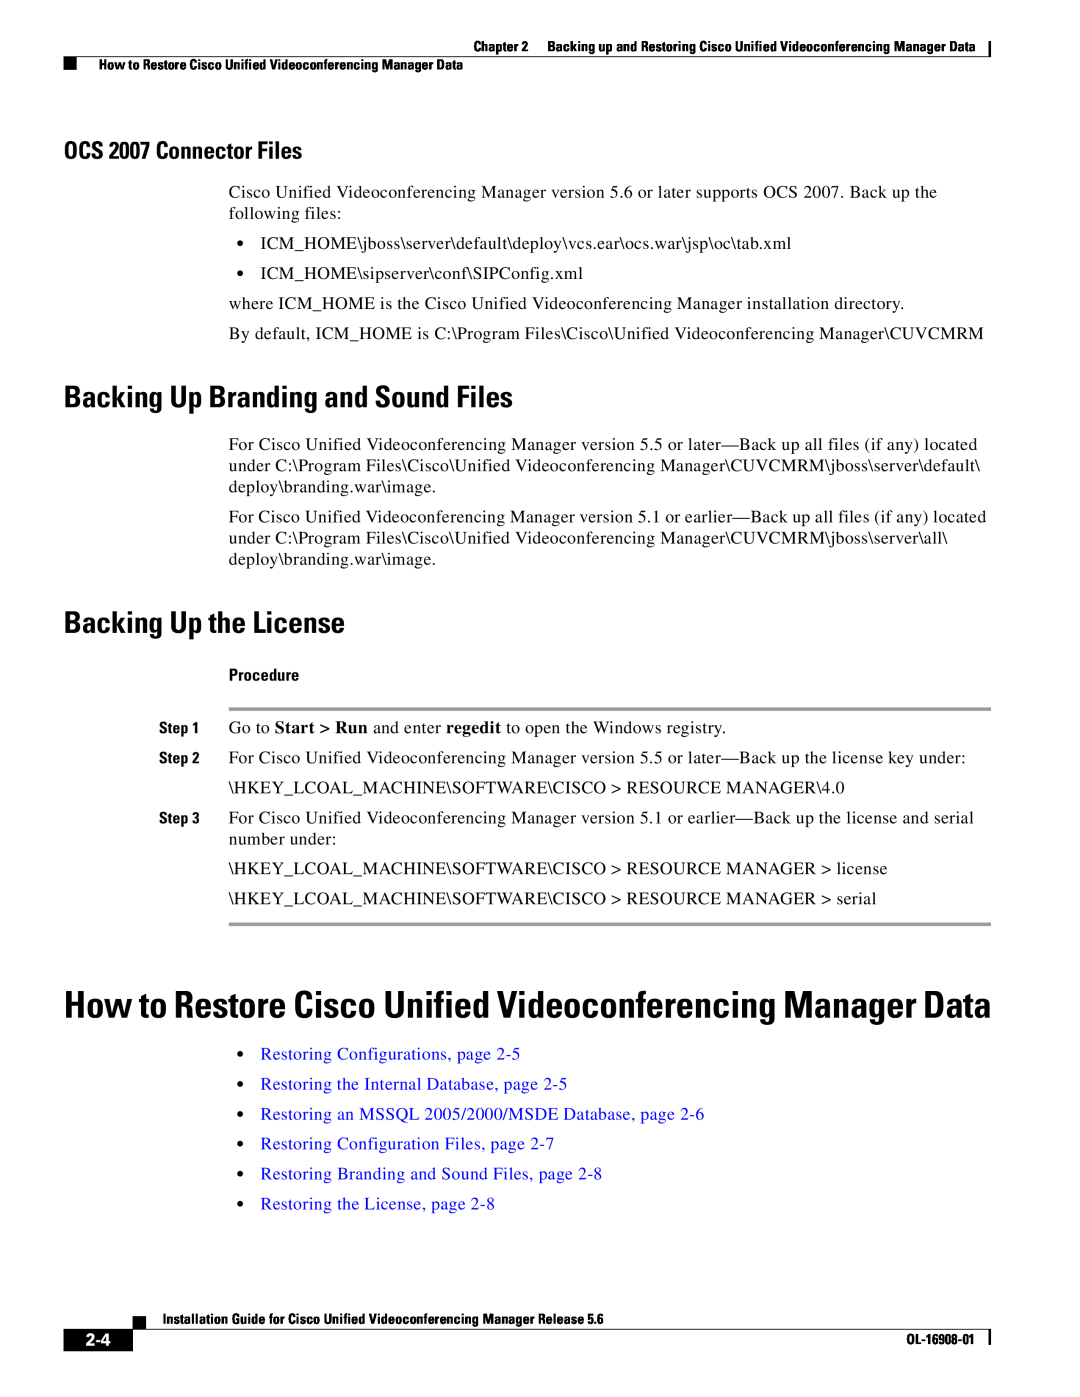 Cisco Systems Unified Videoconferencing Manager Backing Up Branding and Sound Files, Backing Up the License, Procedure 